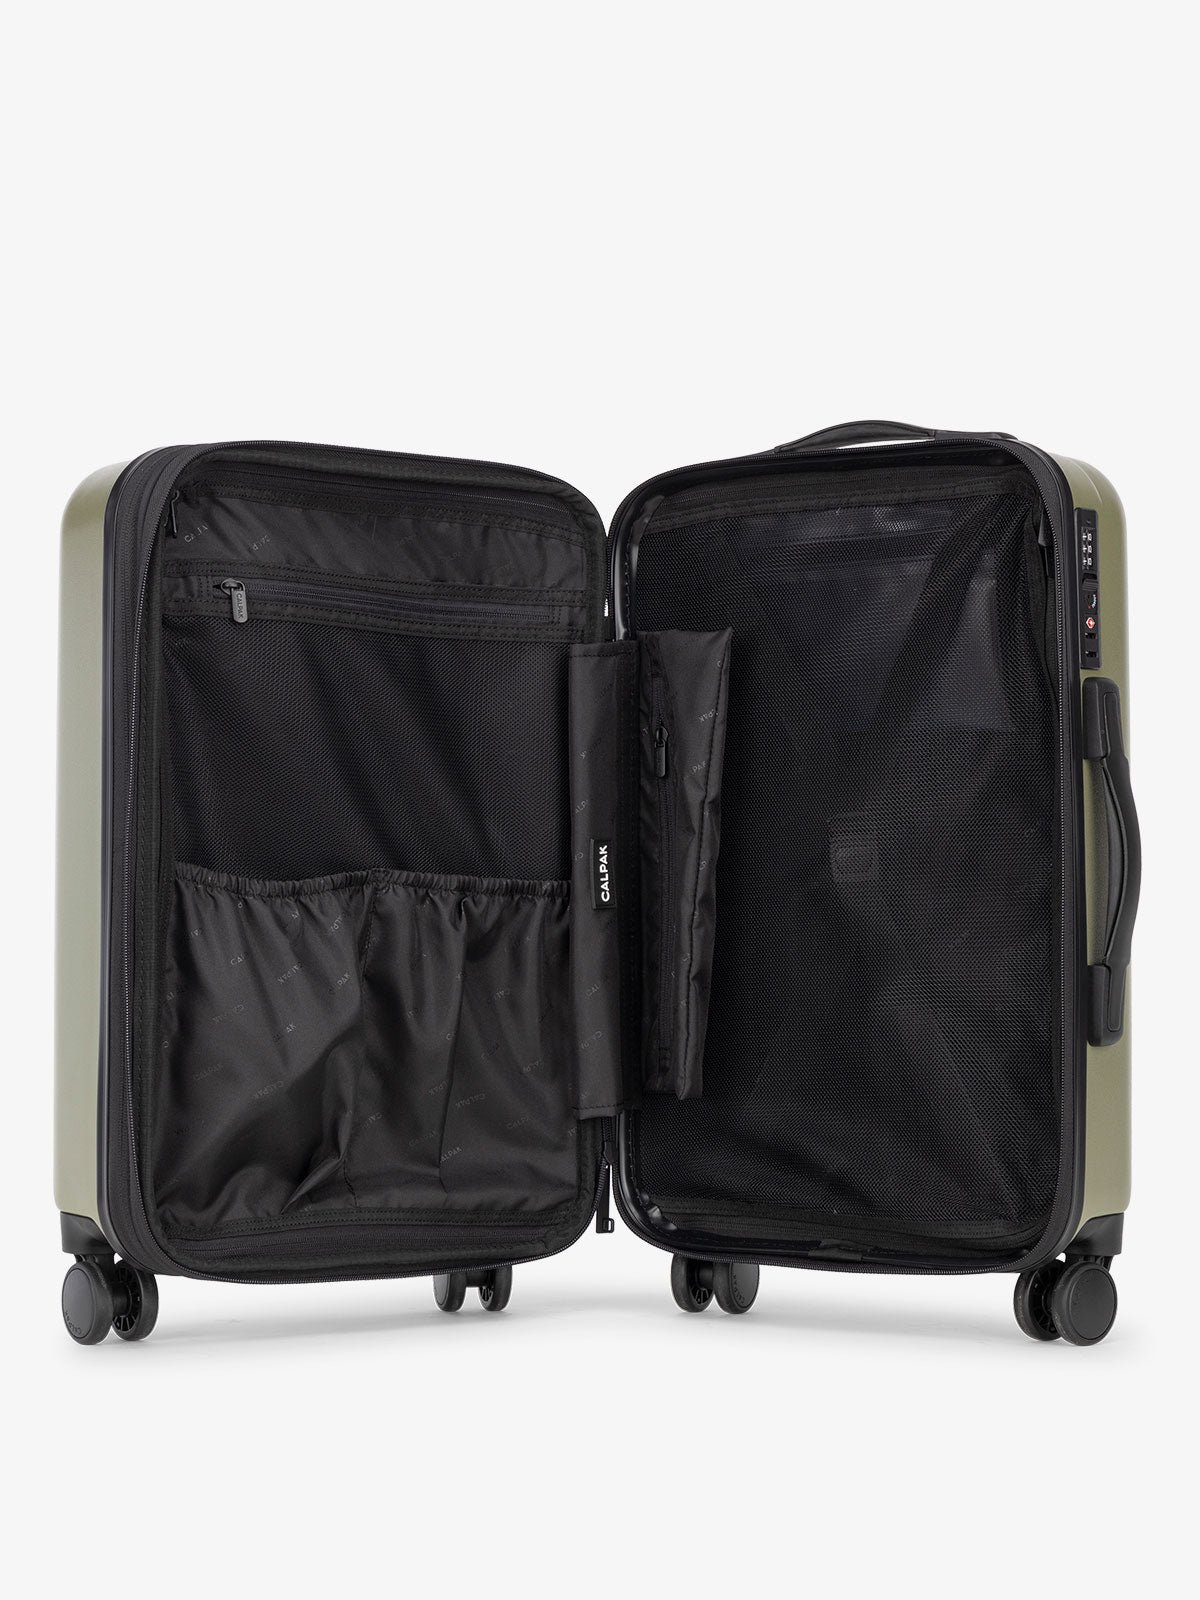 Pistachio CALPAK Evry Carry-On Luggage features divided compartments with interior pockets for organized packing